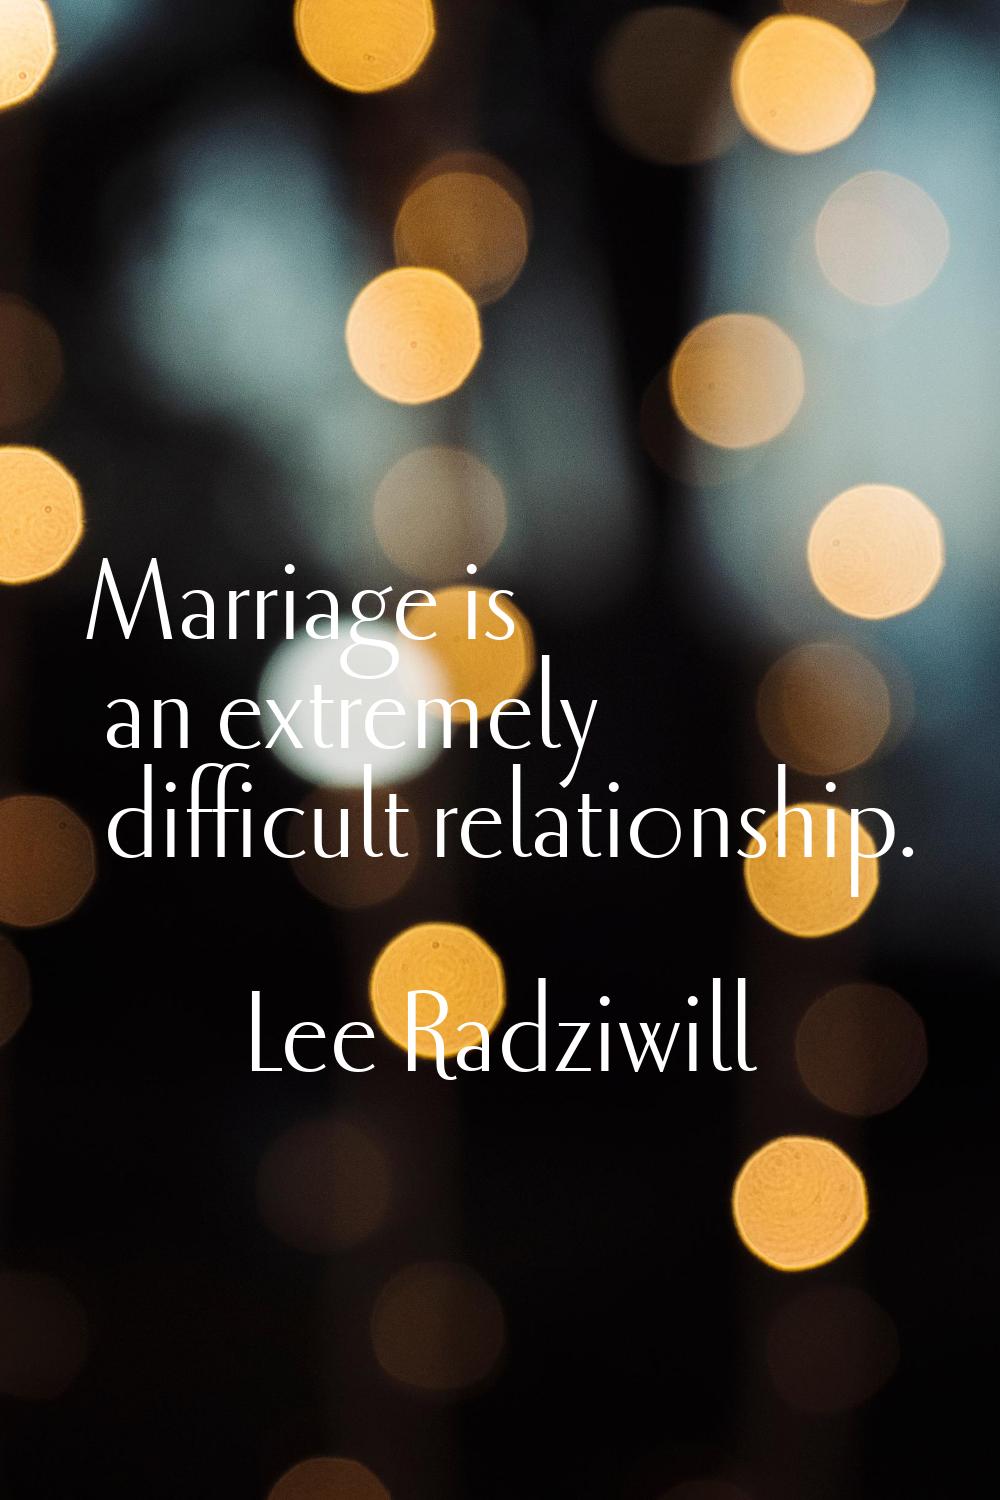 Marriage is an extremely difficult relationship.